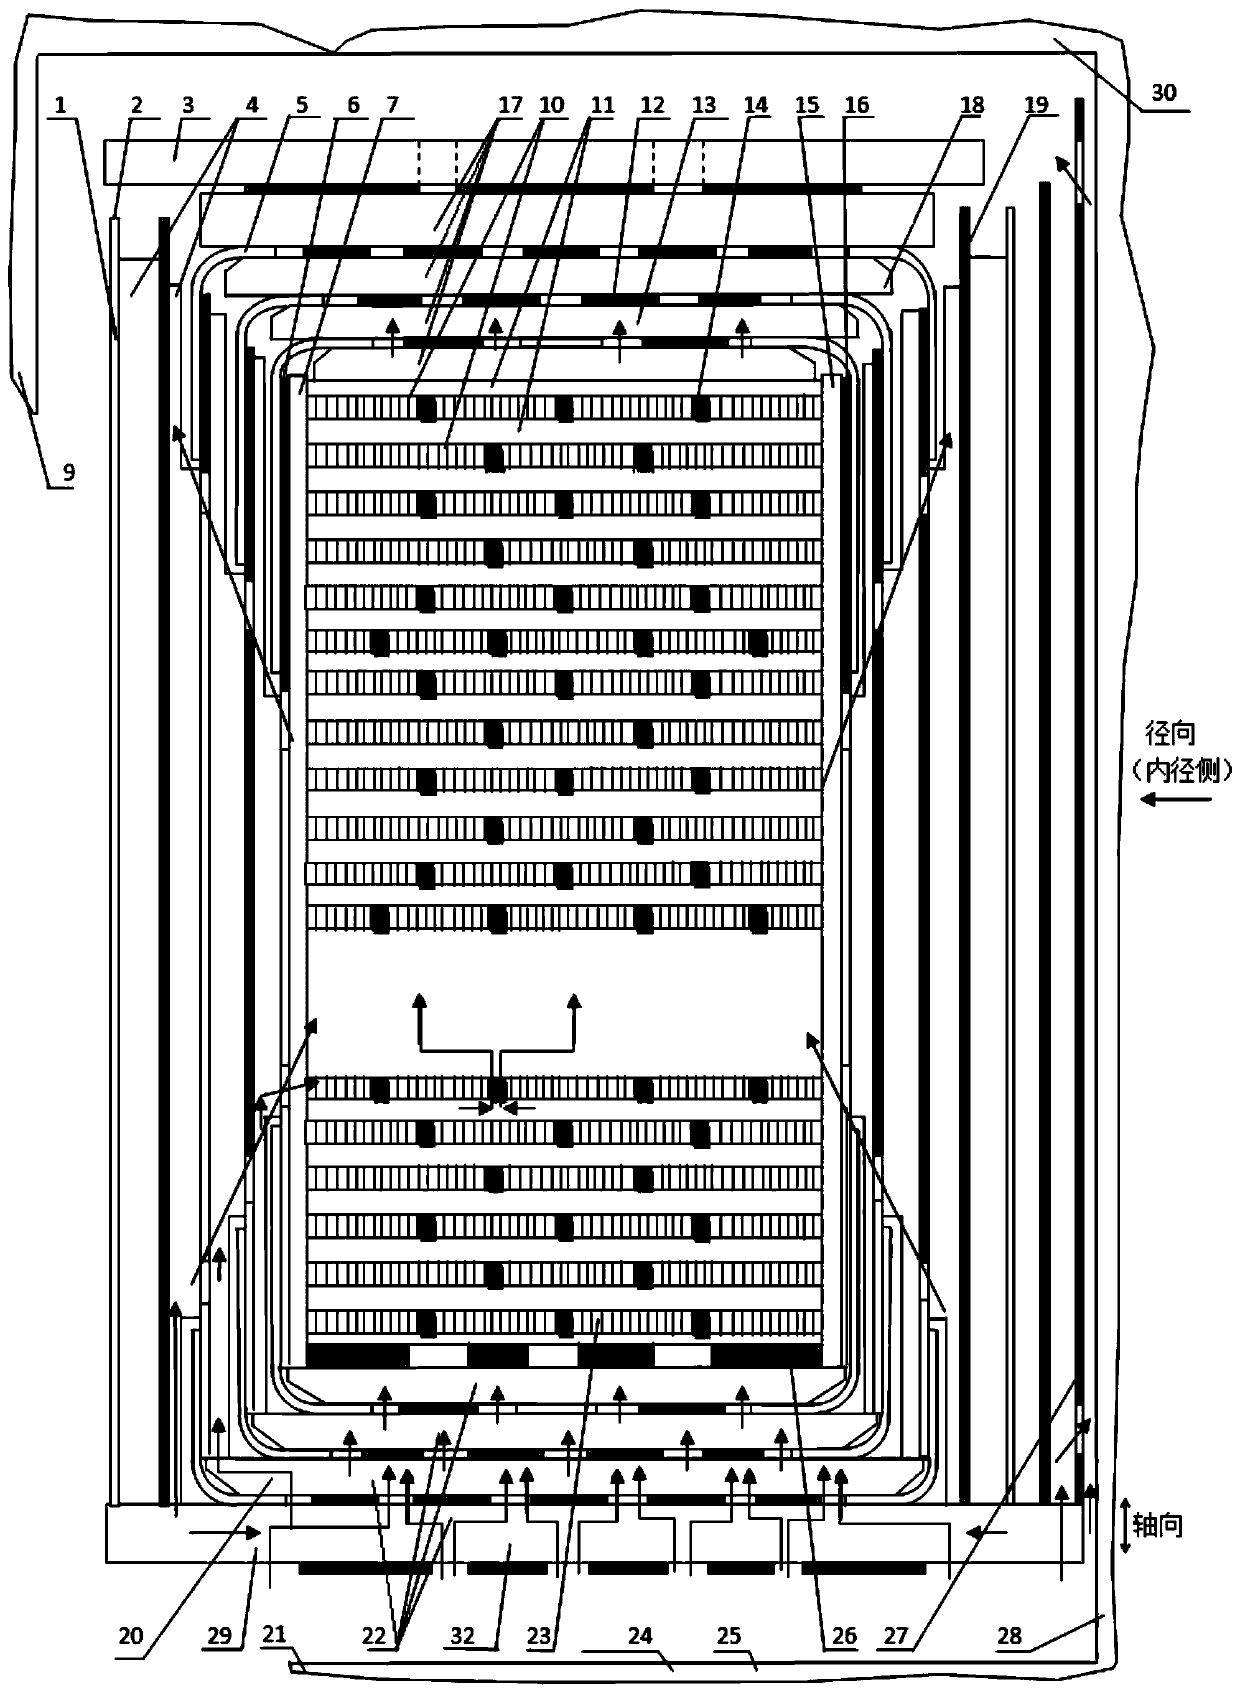 A body cooling structure for transformer or reactor